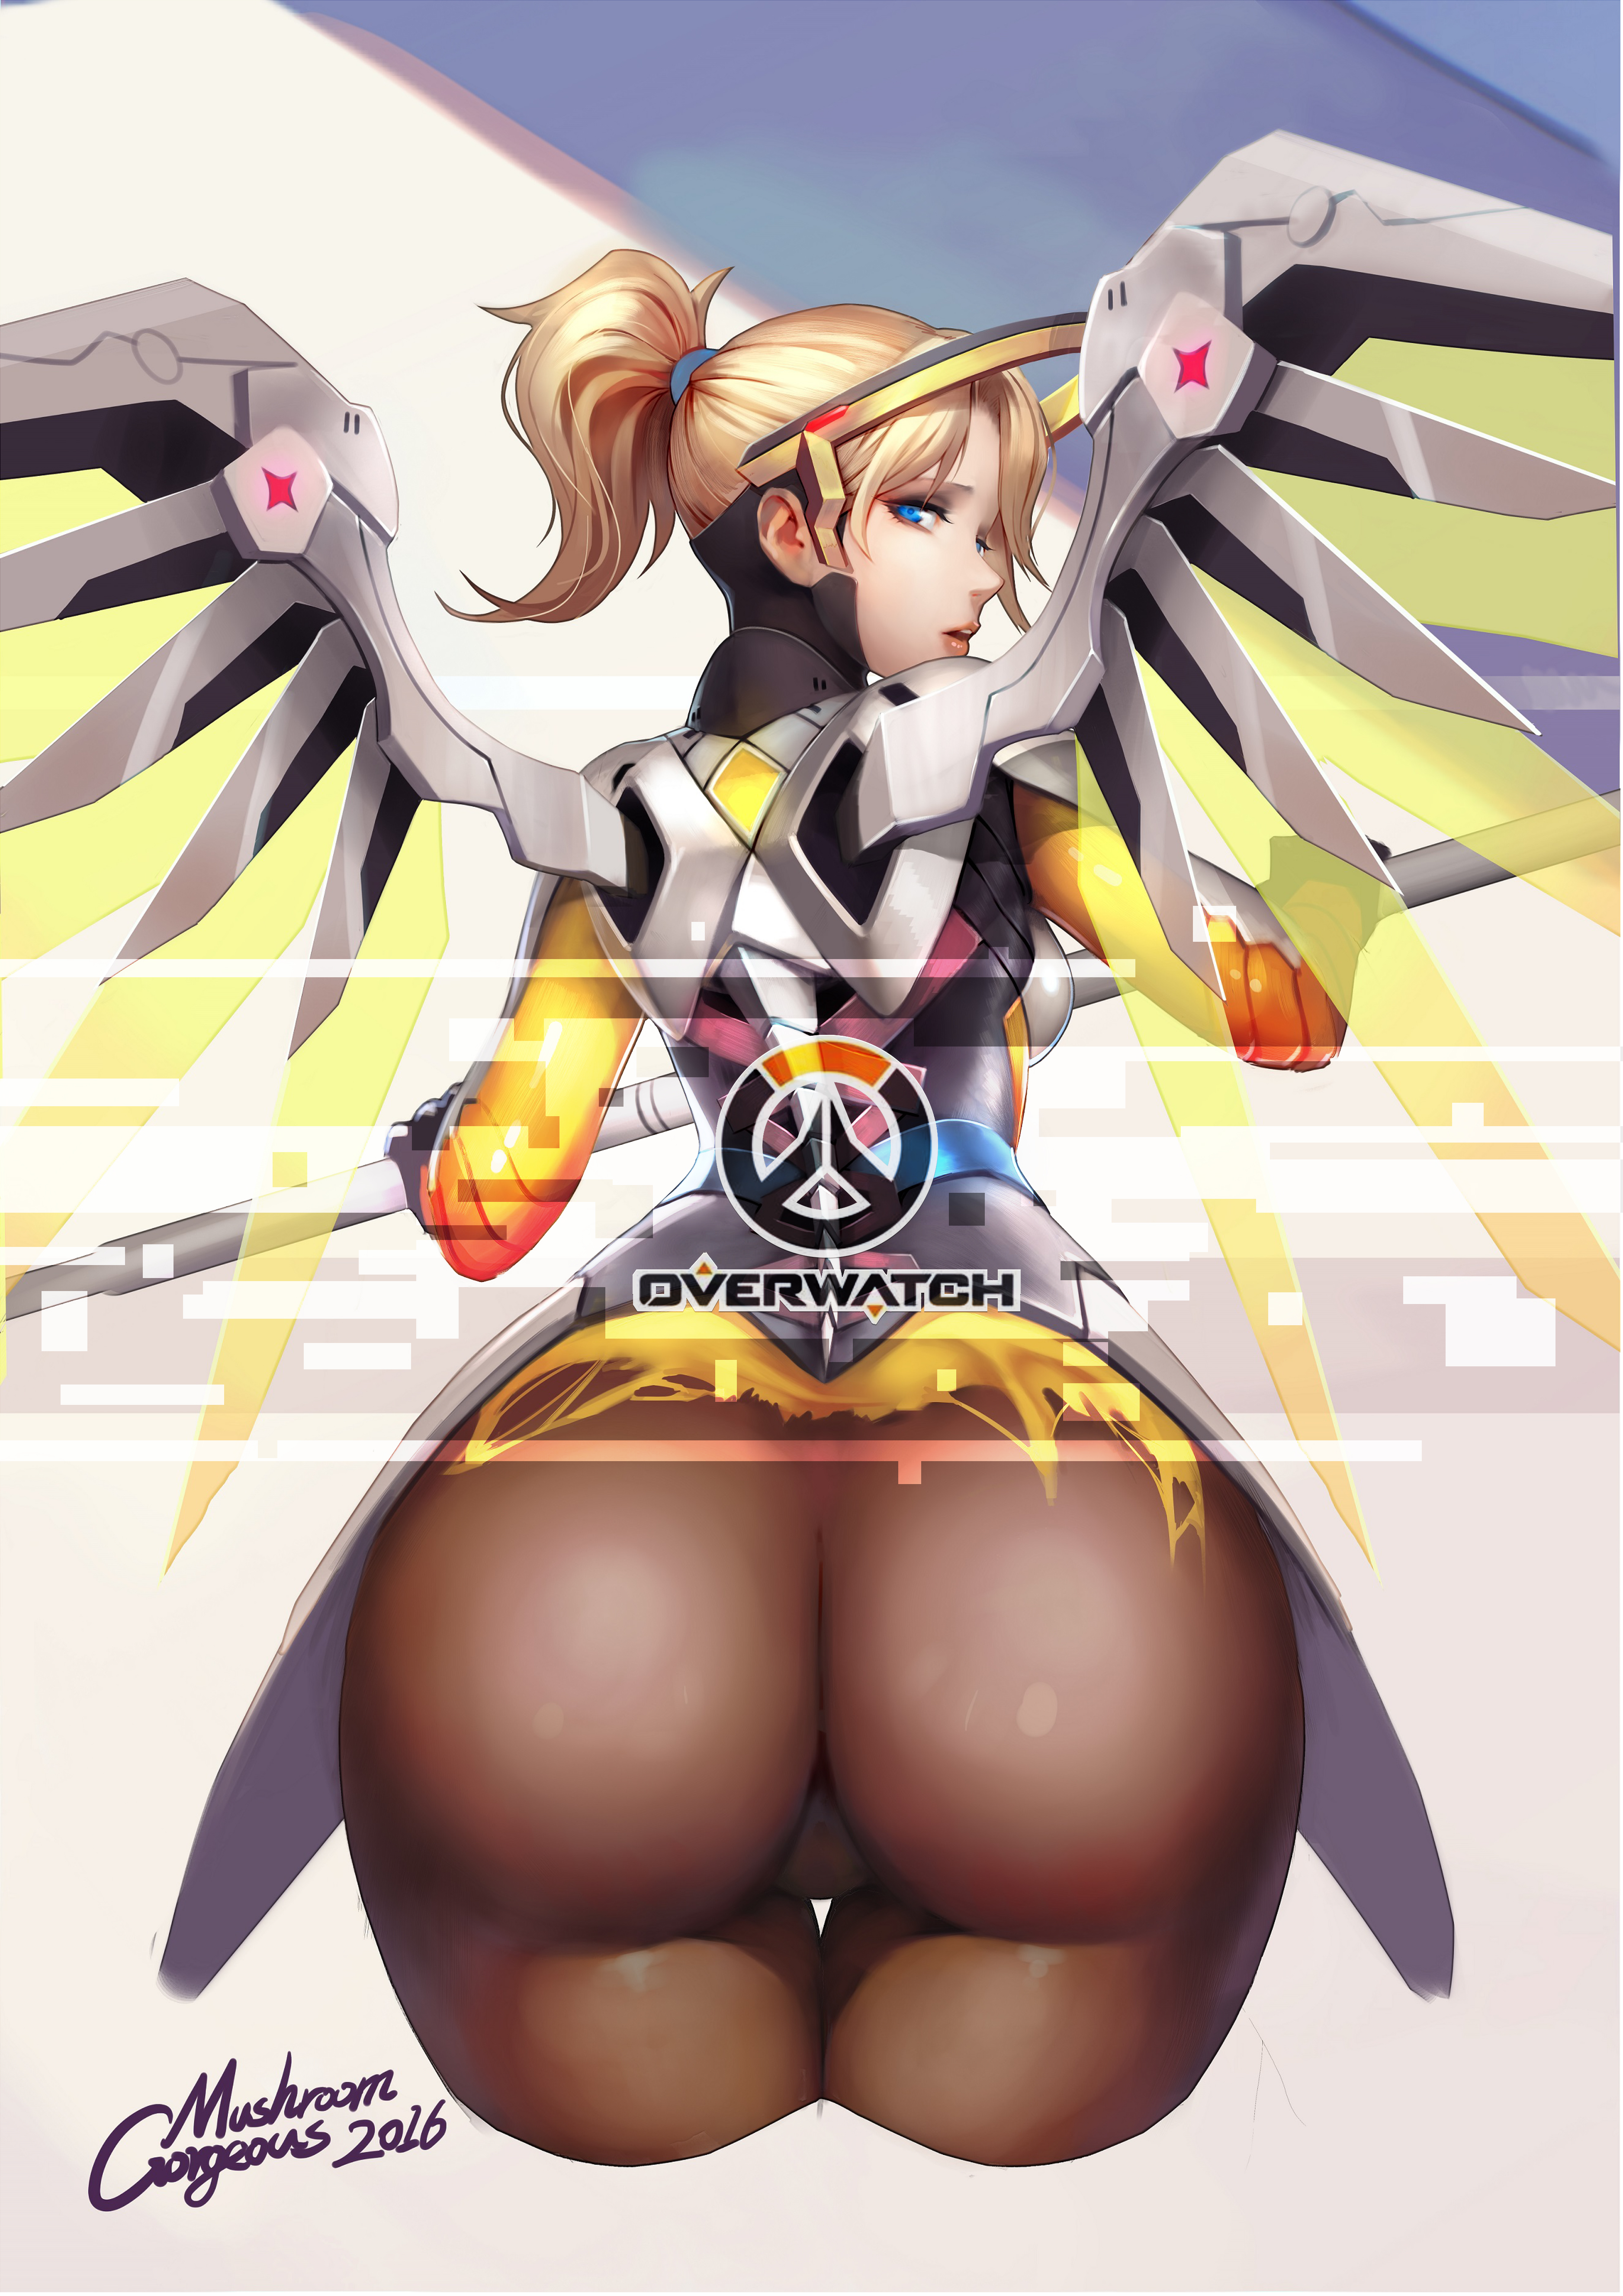 Anime 3751x5305 Gorgeous Mushroom Overwatch ass Mercy (Overwatch) blonde blue eyes ponytail PC gaming video game girls curvy rear view